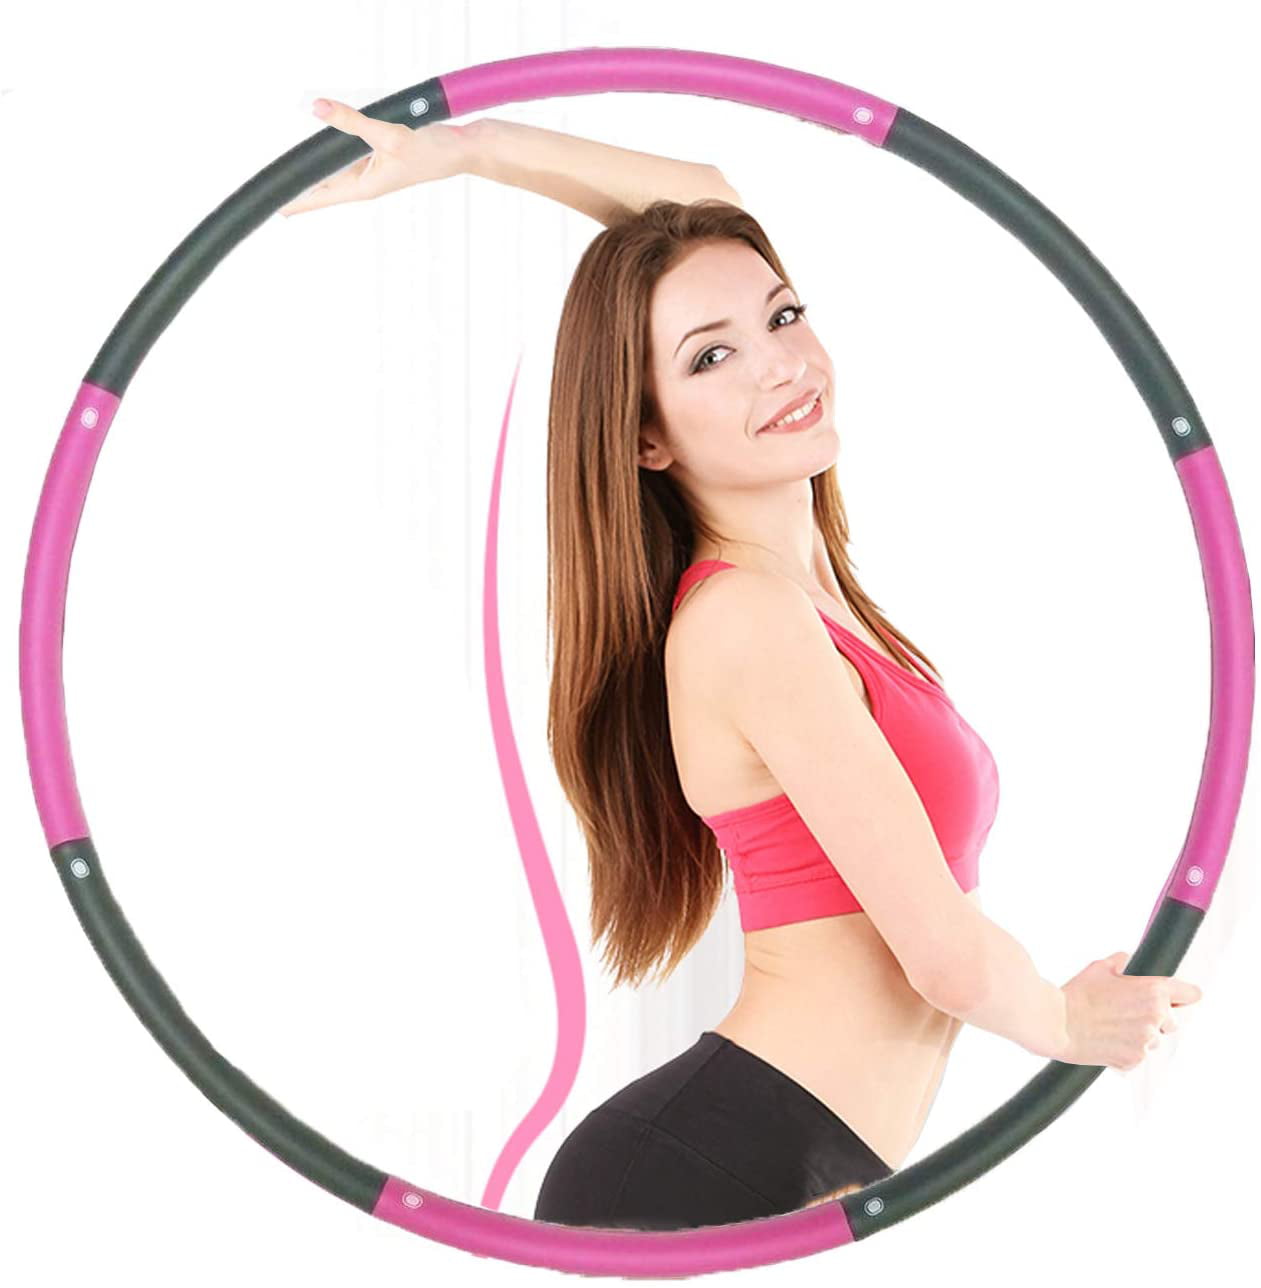 Adjustable Hoola Hooping 8 Detachable Sections 2lb Hoola Hoop for Adults Hoola-Hooping Easy to Spin for Men & Women Soft Fitness Hoola Hoops Loose Weight Fast